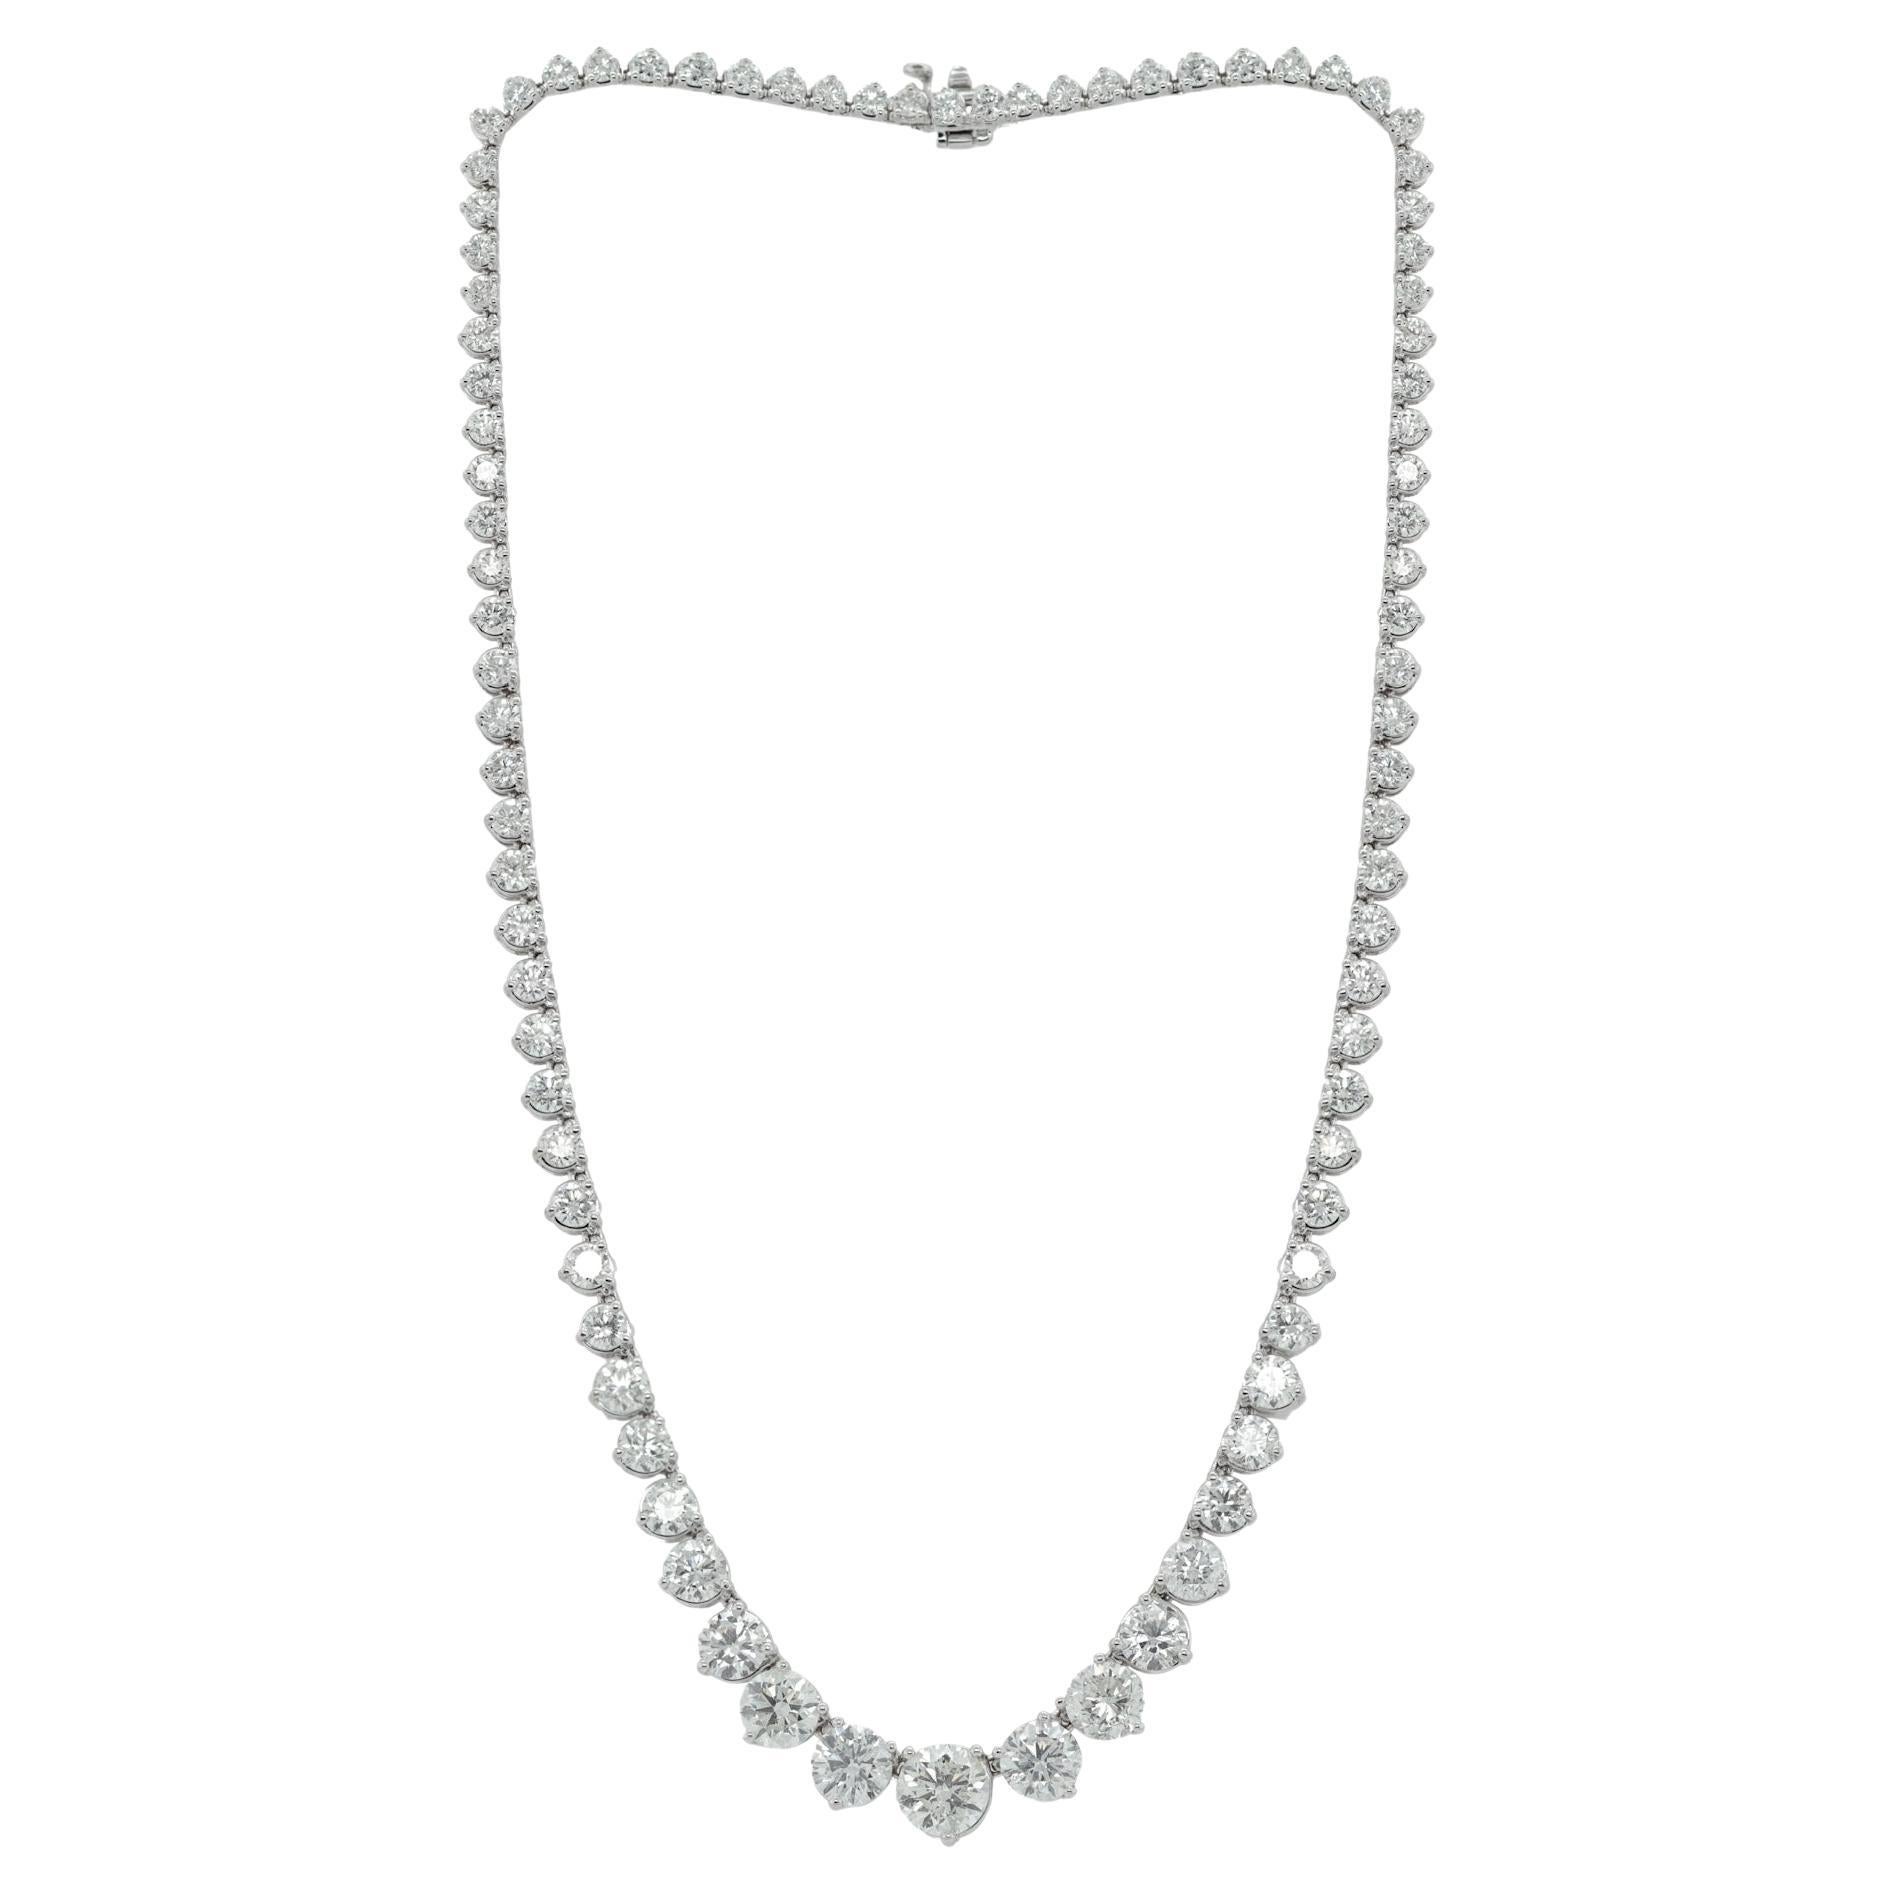 Diana M. 18kt White Gold Graduated  Riviera Tennis Necklace  24.45 cts 3-prong